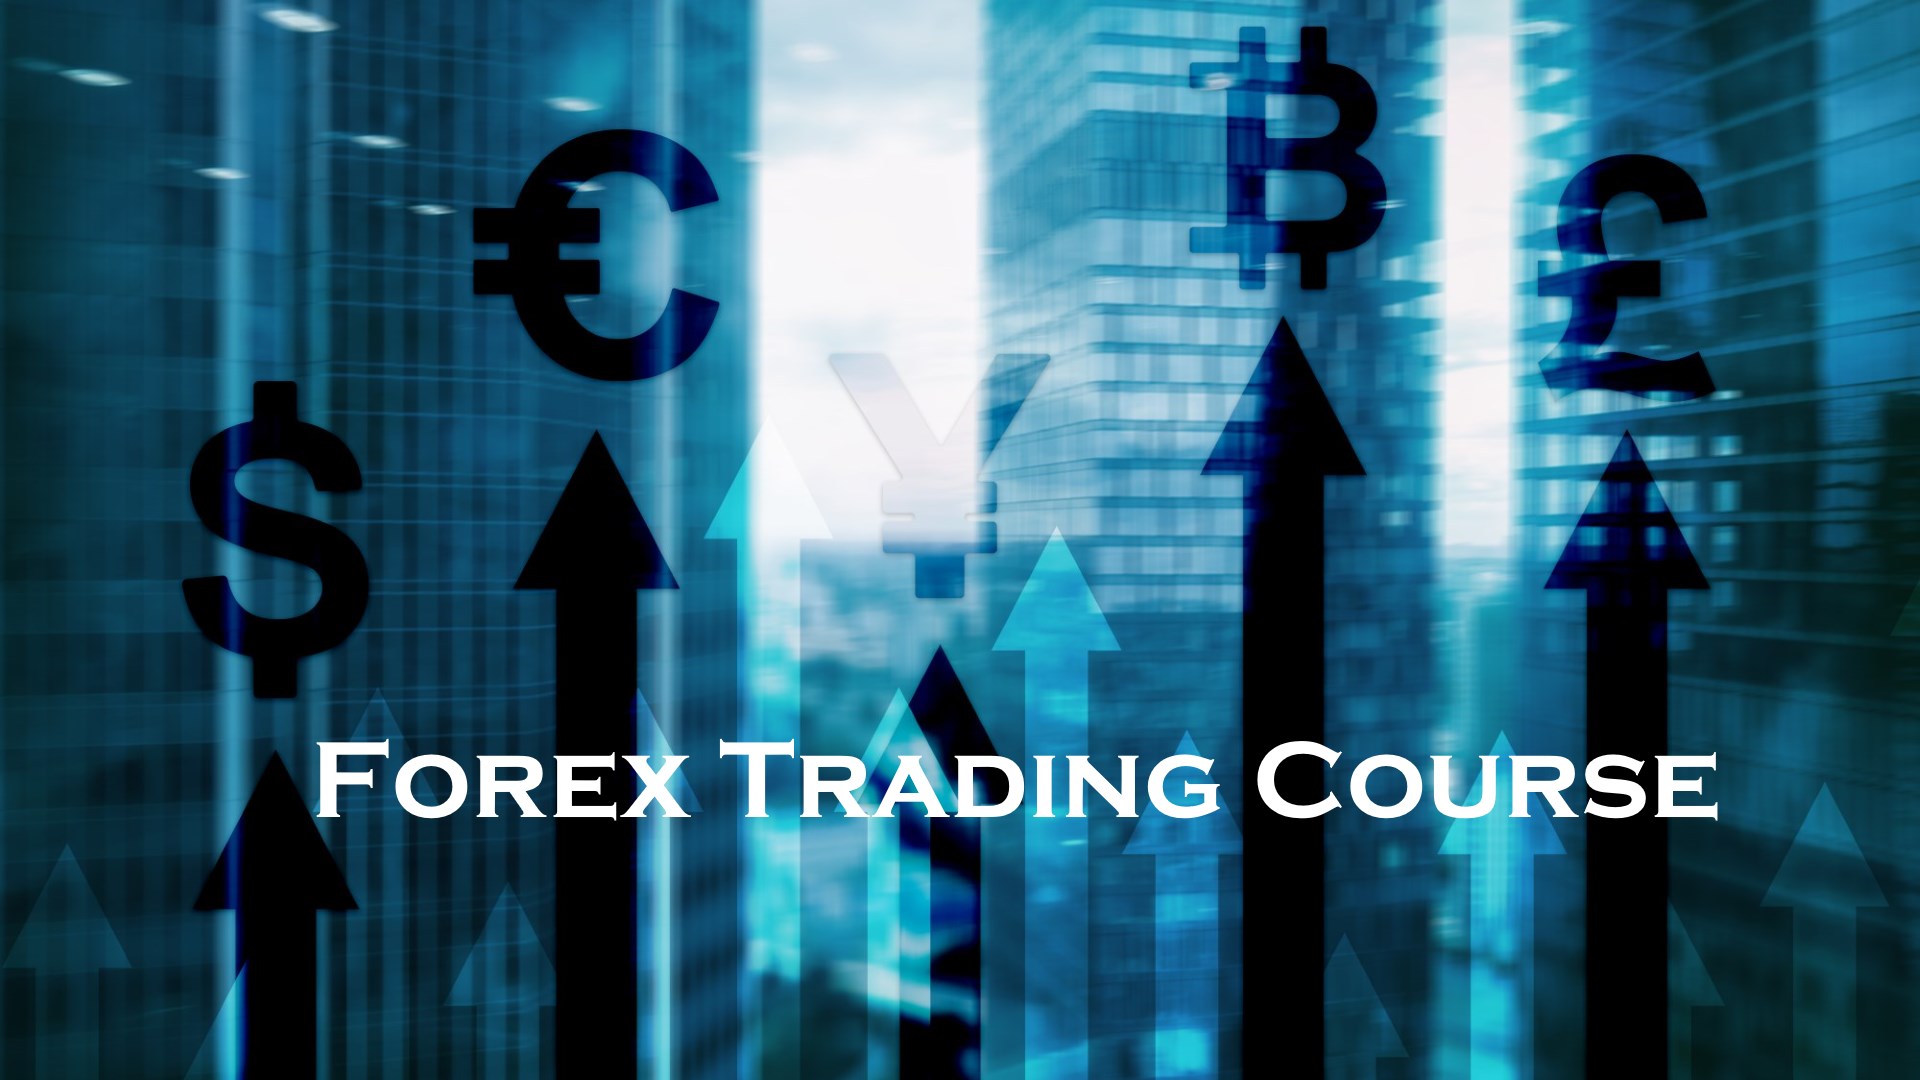 Forex 4 exchanges